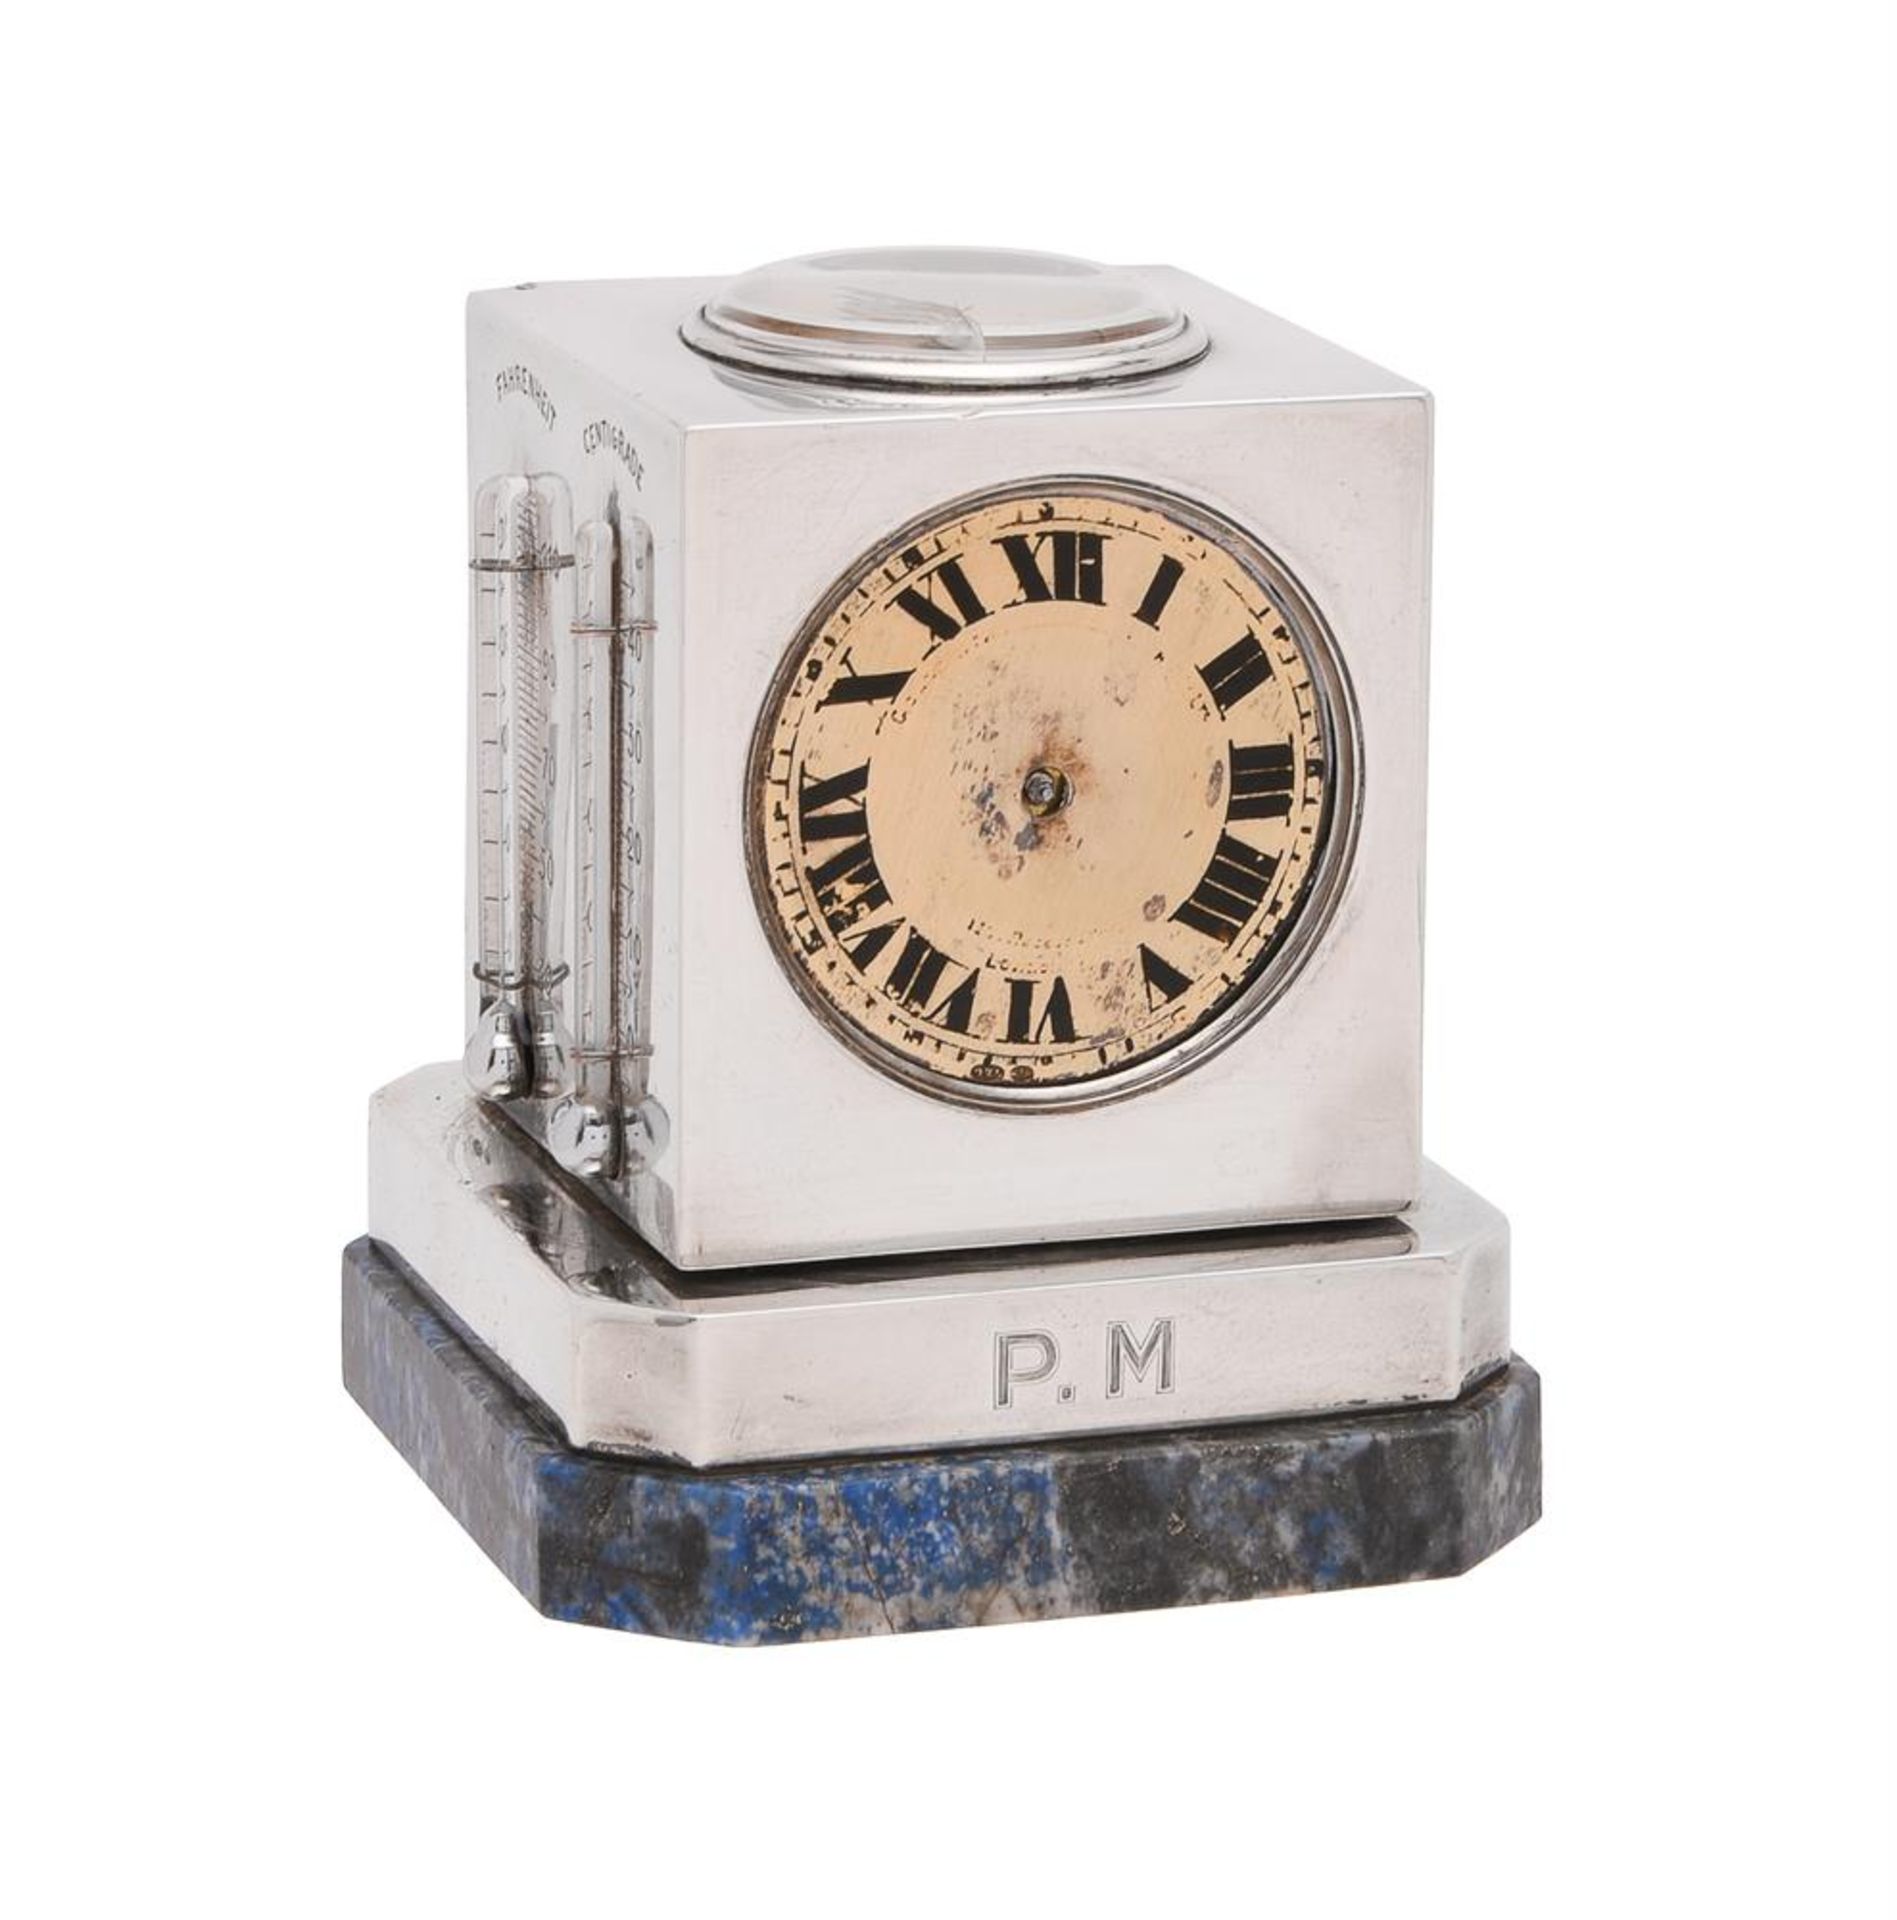 Y A SILVER REVOLVING DESK TIMEPIECE COMPENDIUM WITH BAROMETER, CALENDAR, THERMOMETERS, AND COMPASS